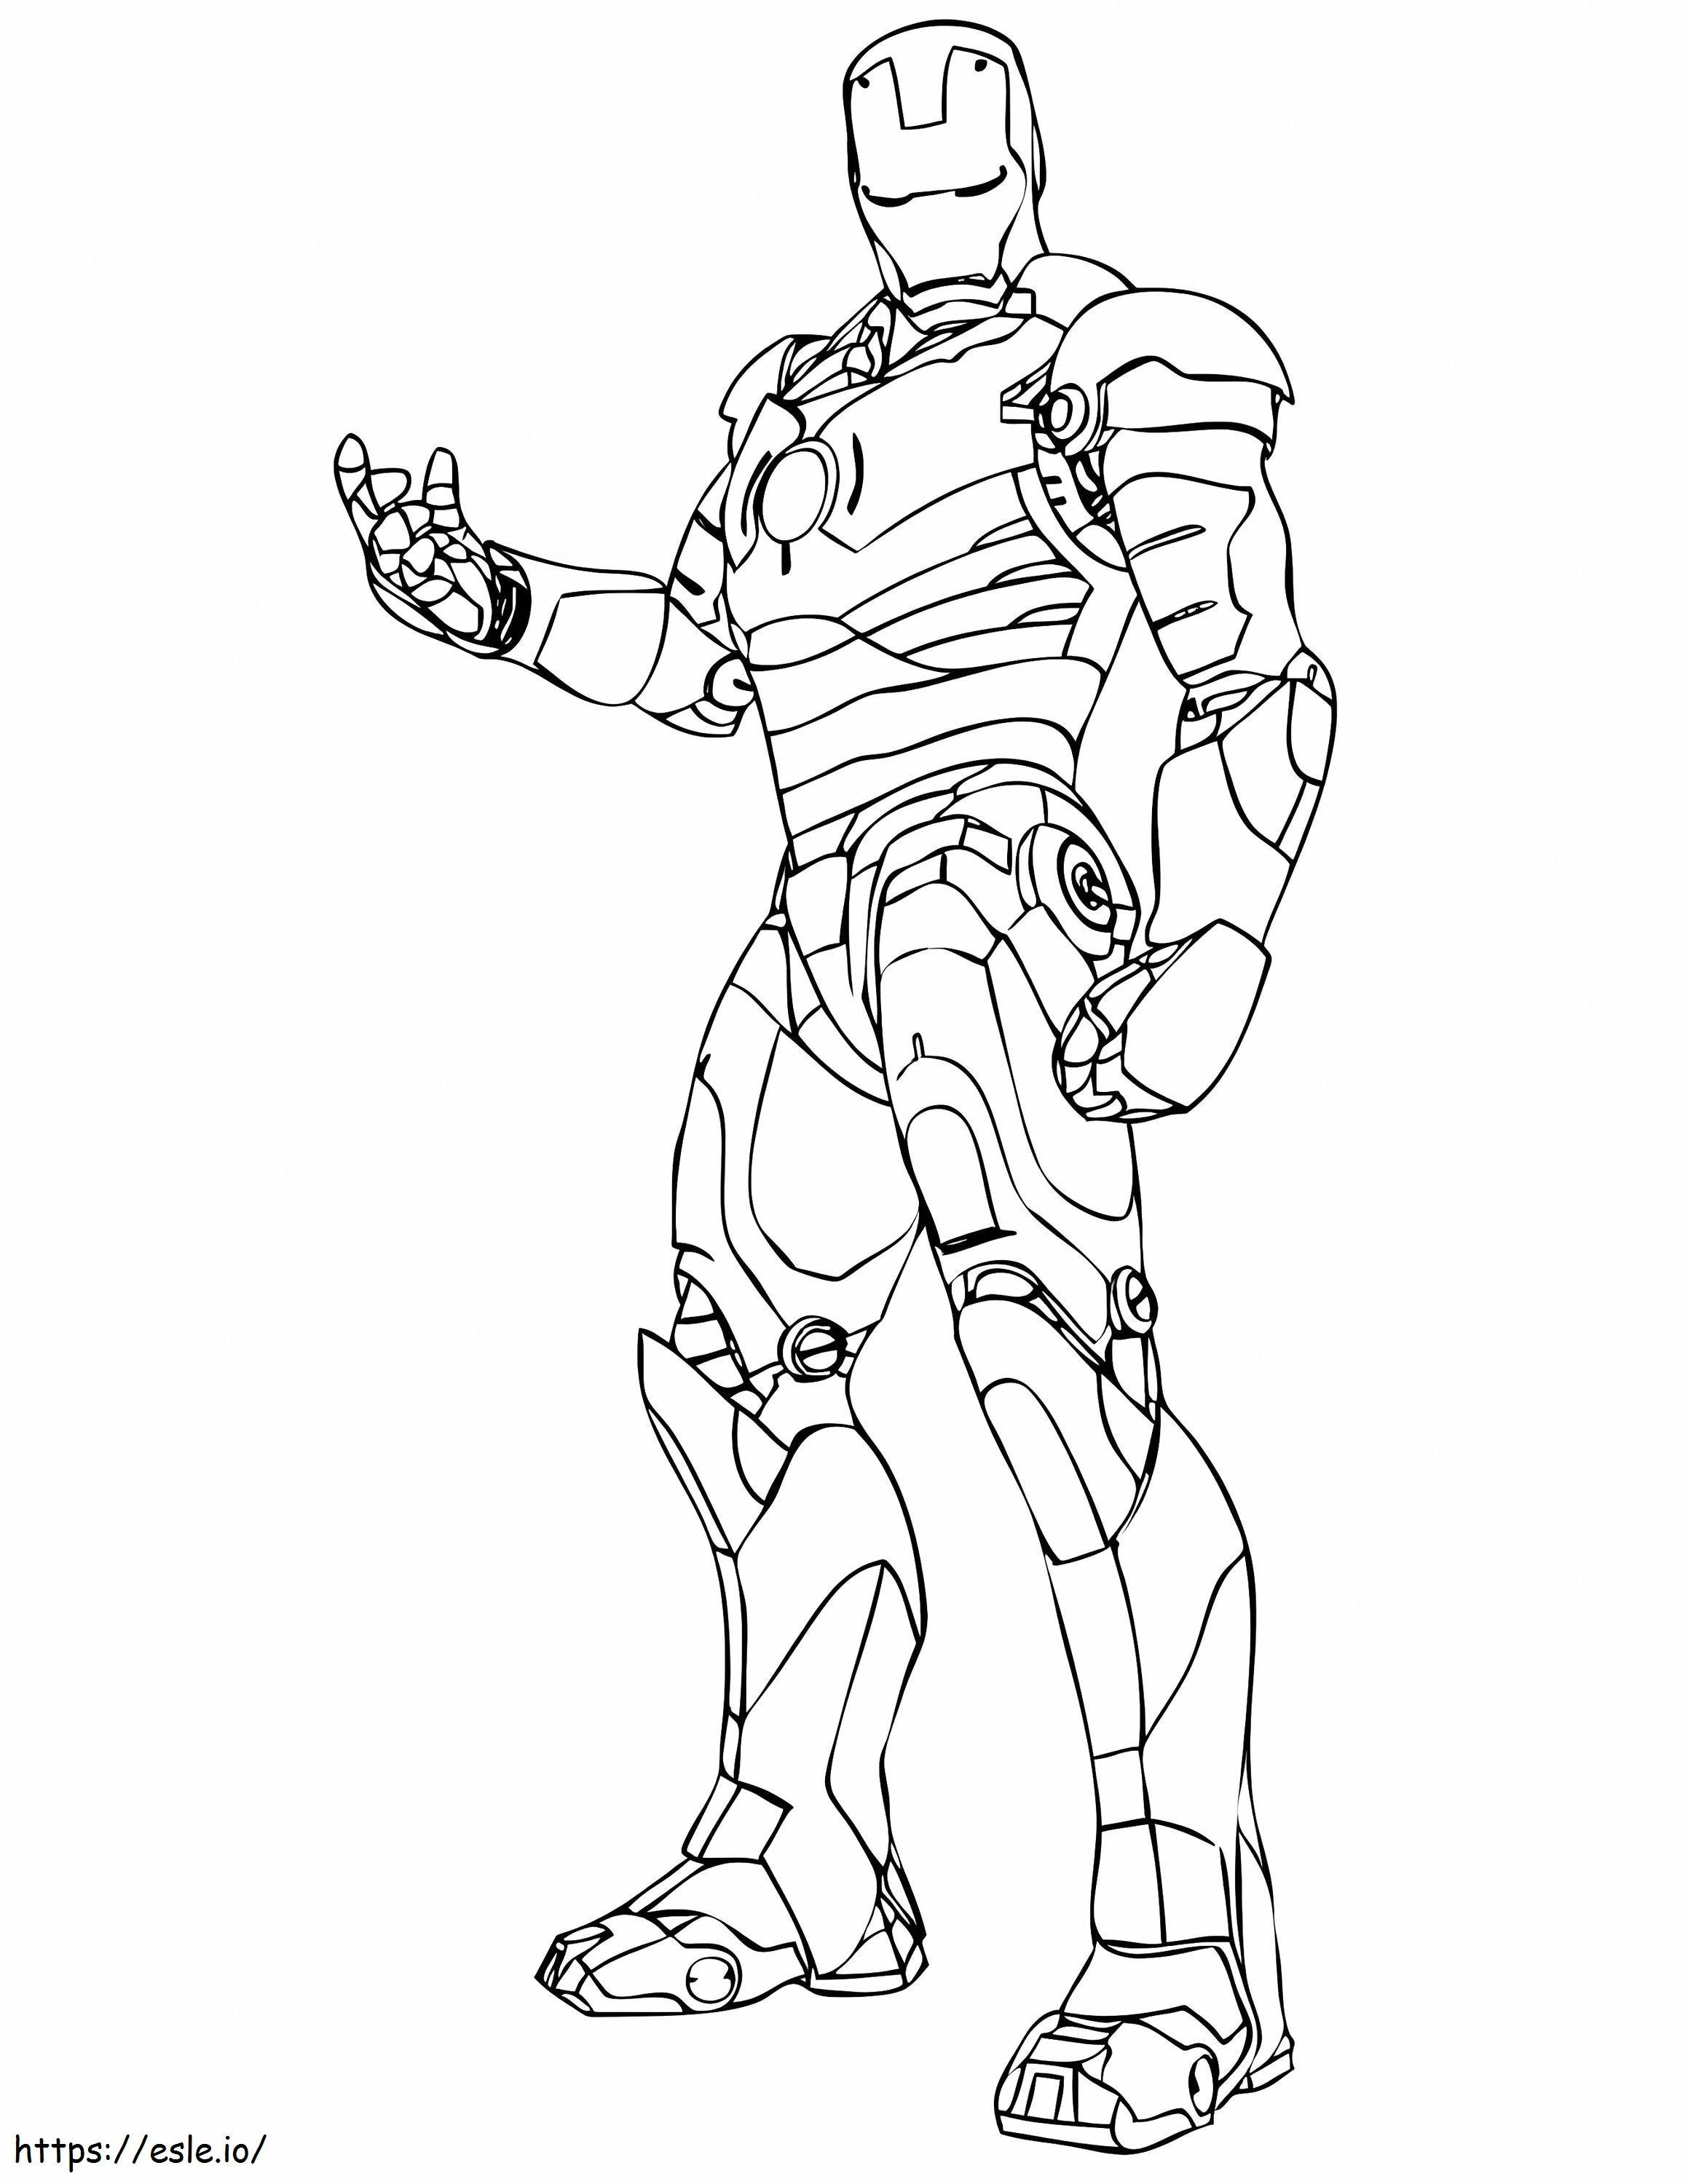 Iron Man Is Angry coloring page